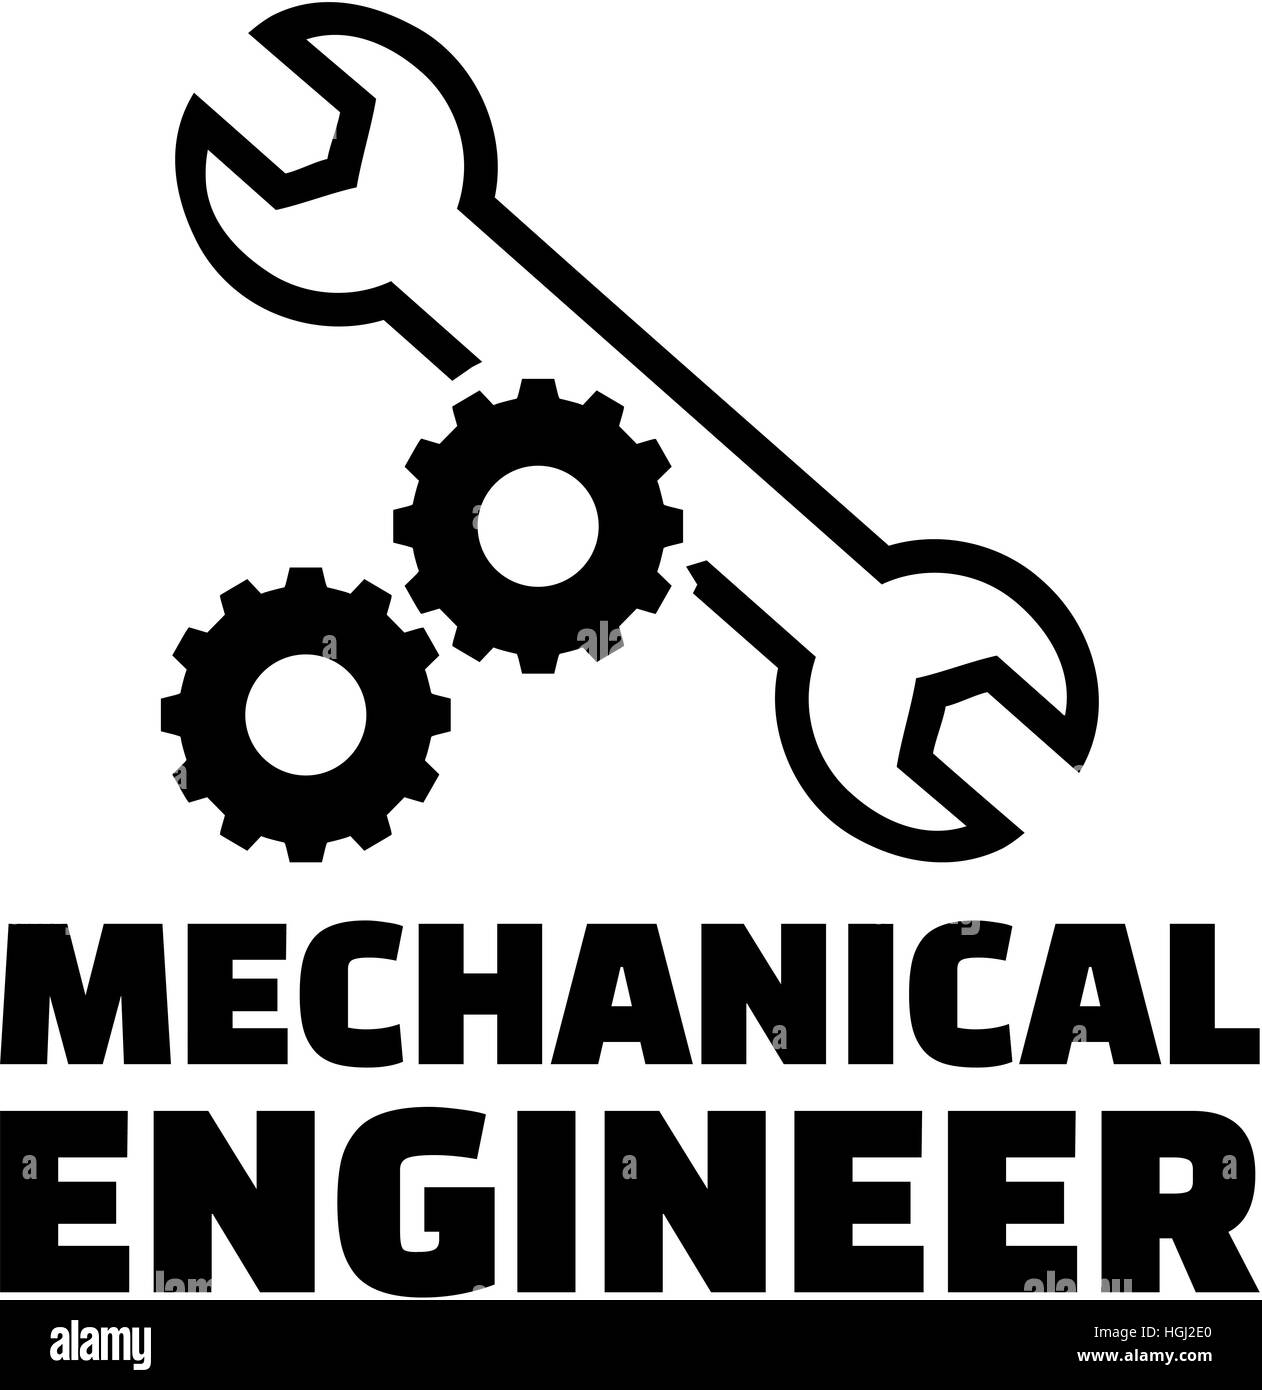 Mechanical engineer with gear wheels and wrench Stock Photo